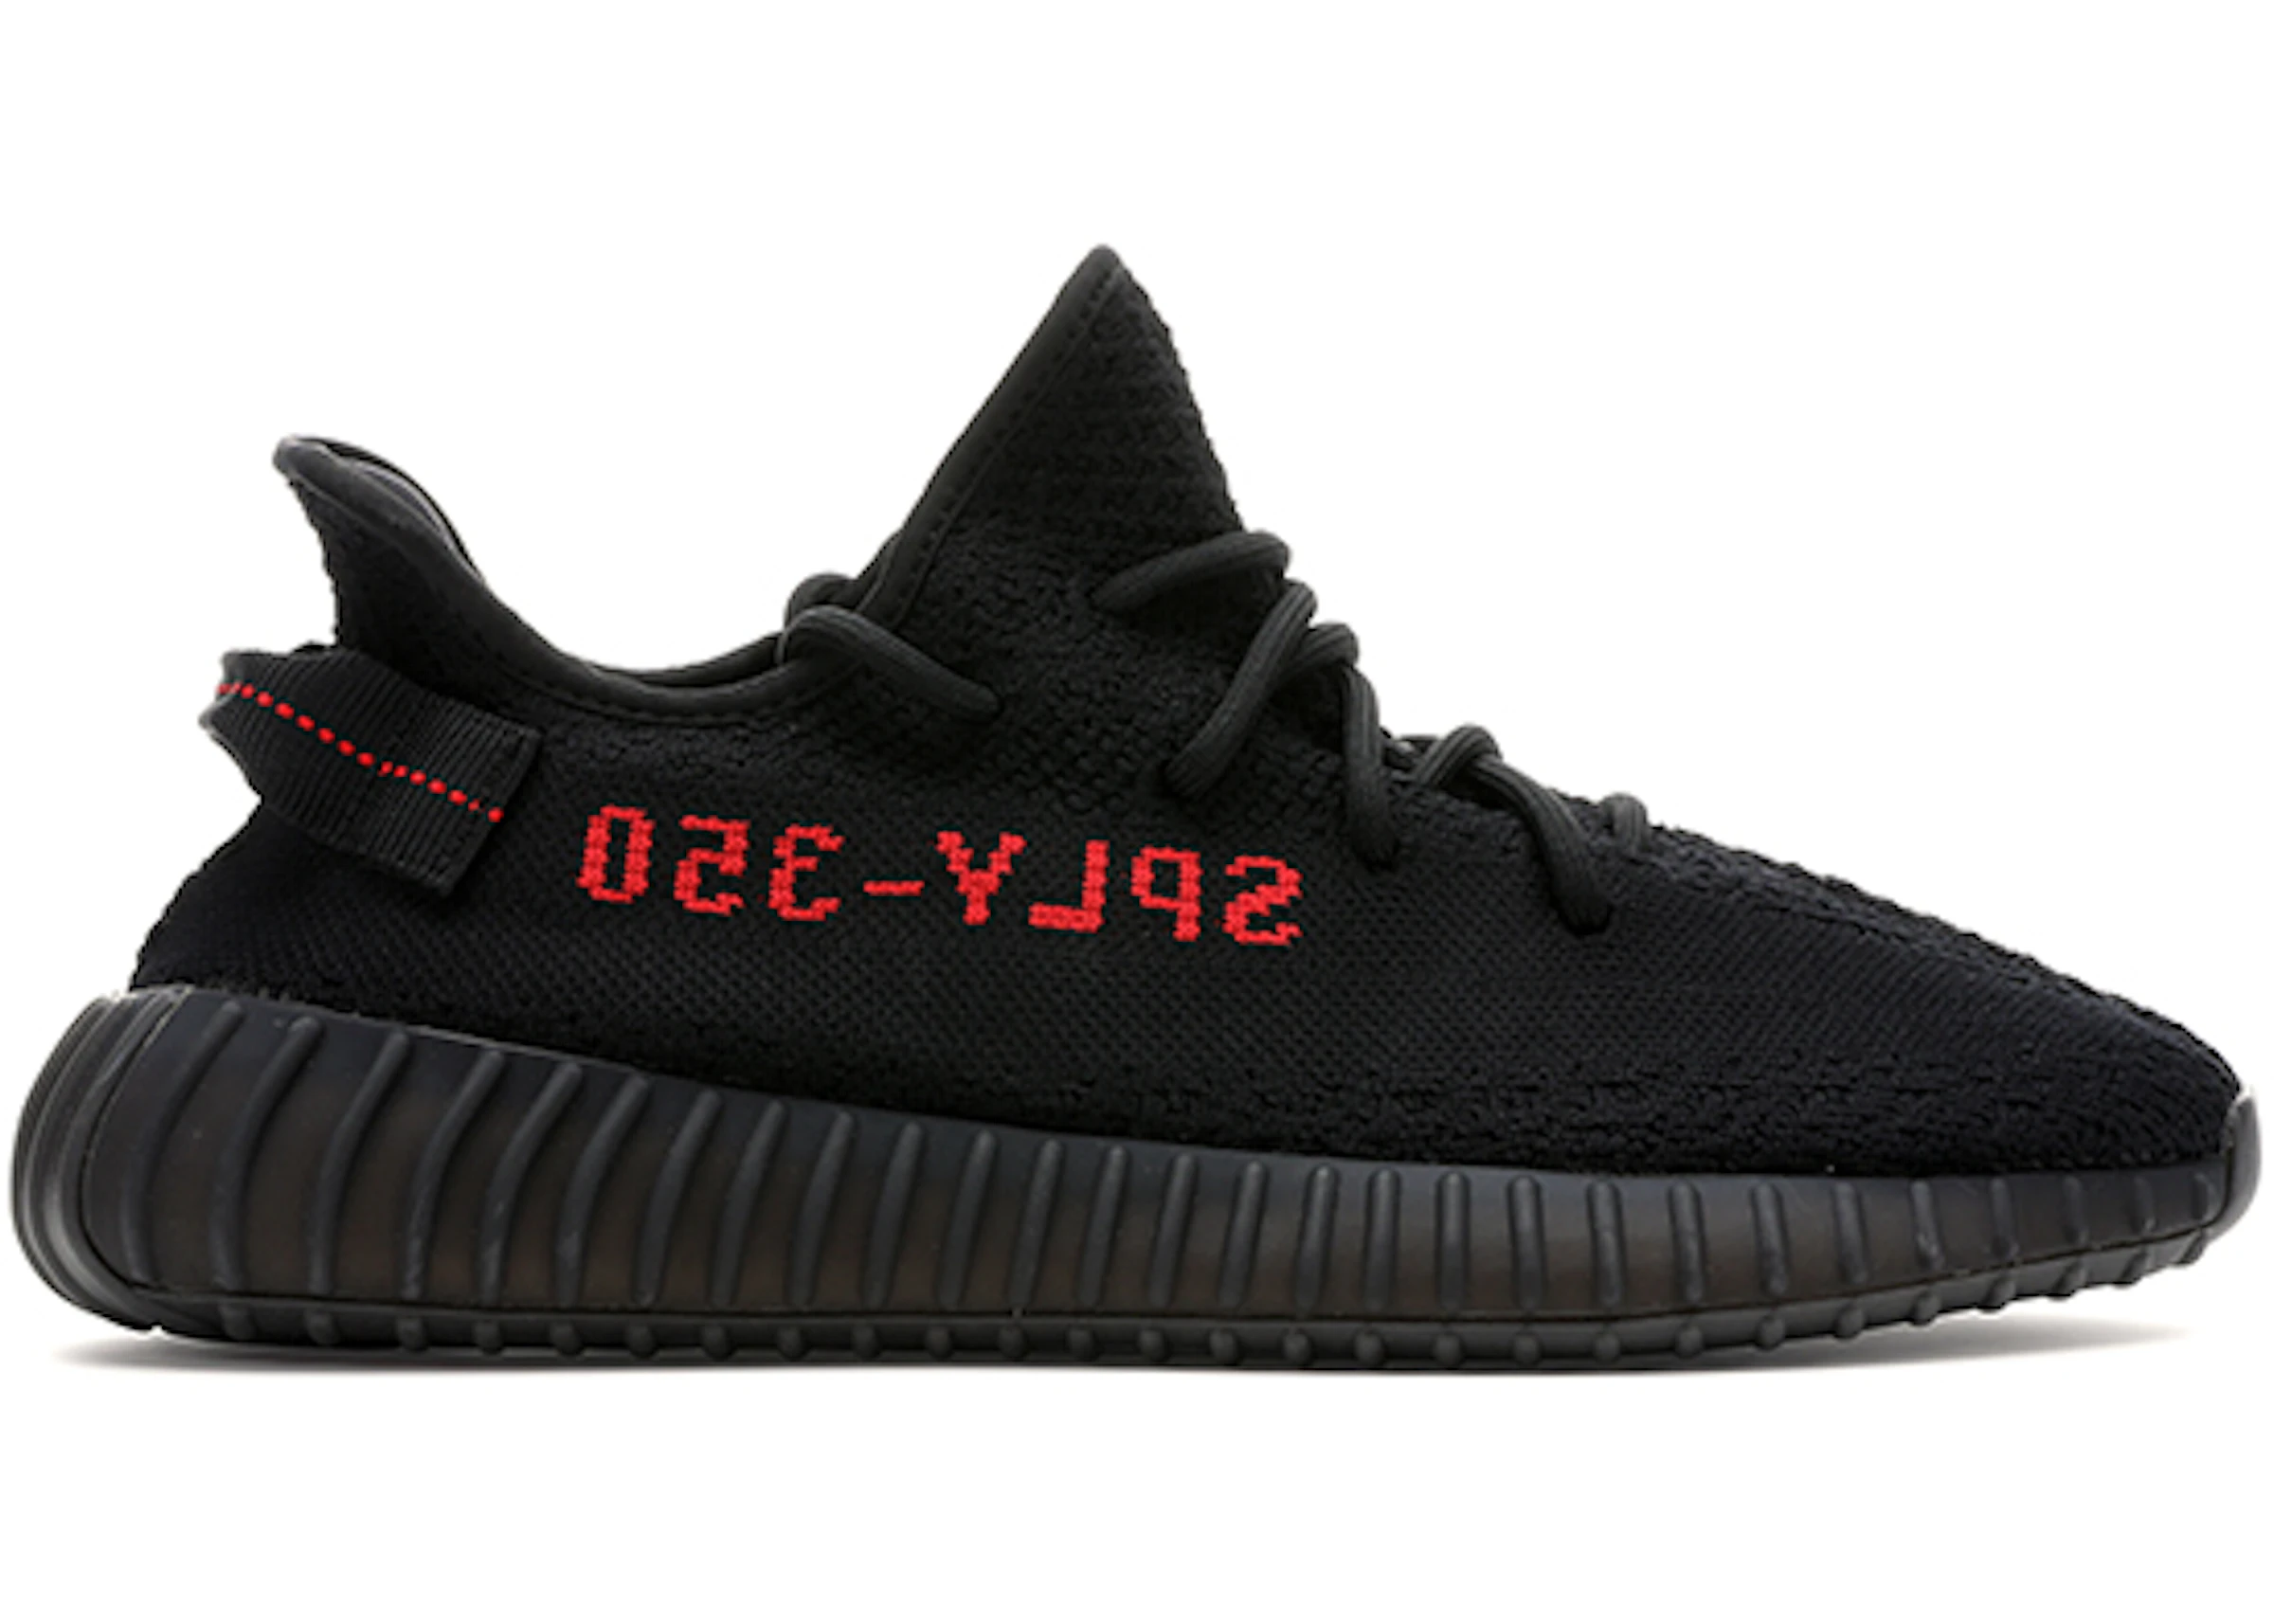 Adidas Yeezy Boost 350 V2 Black Red (2017/2020) - Cp9652 - Us